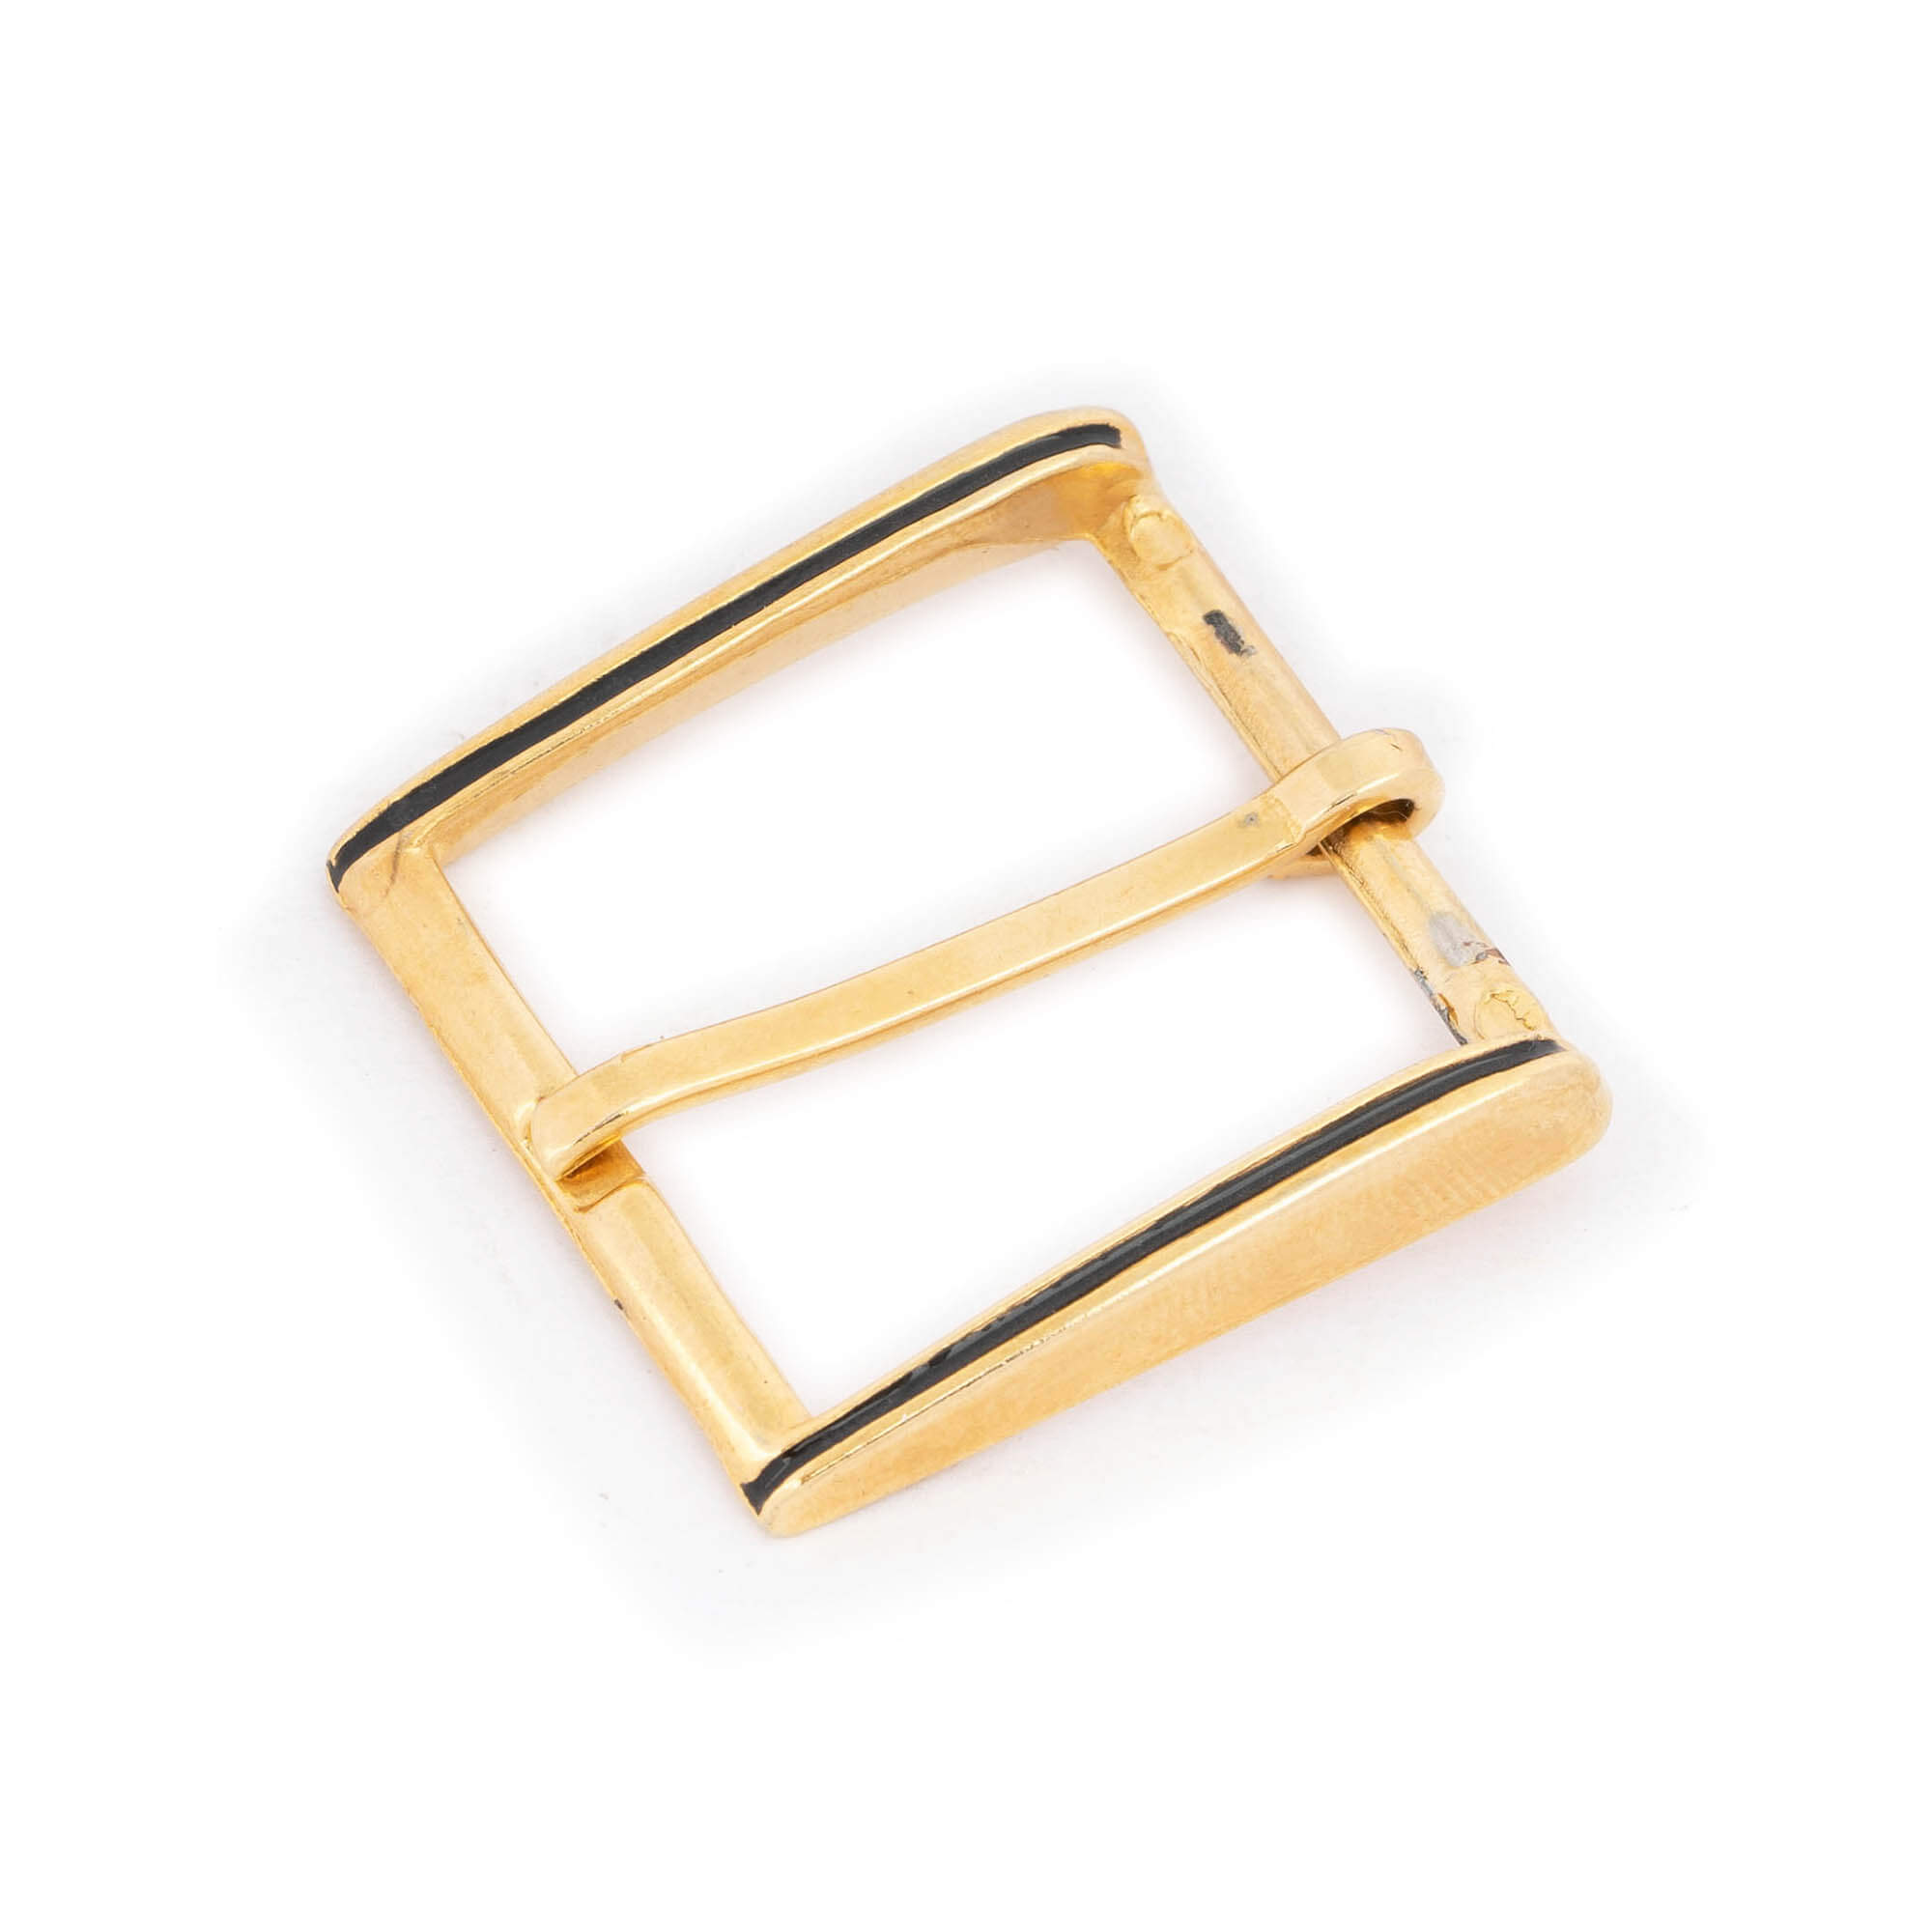 2.5 cm Classic Gold Belt Buckle Replacement